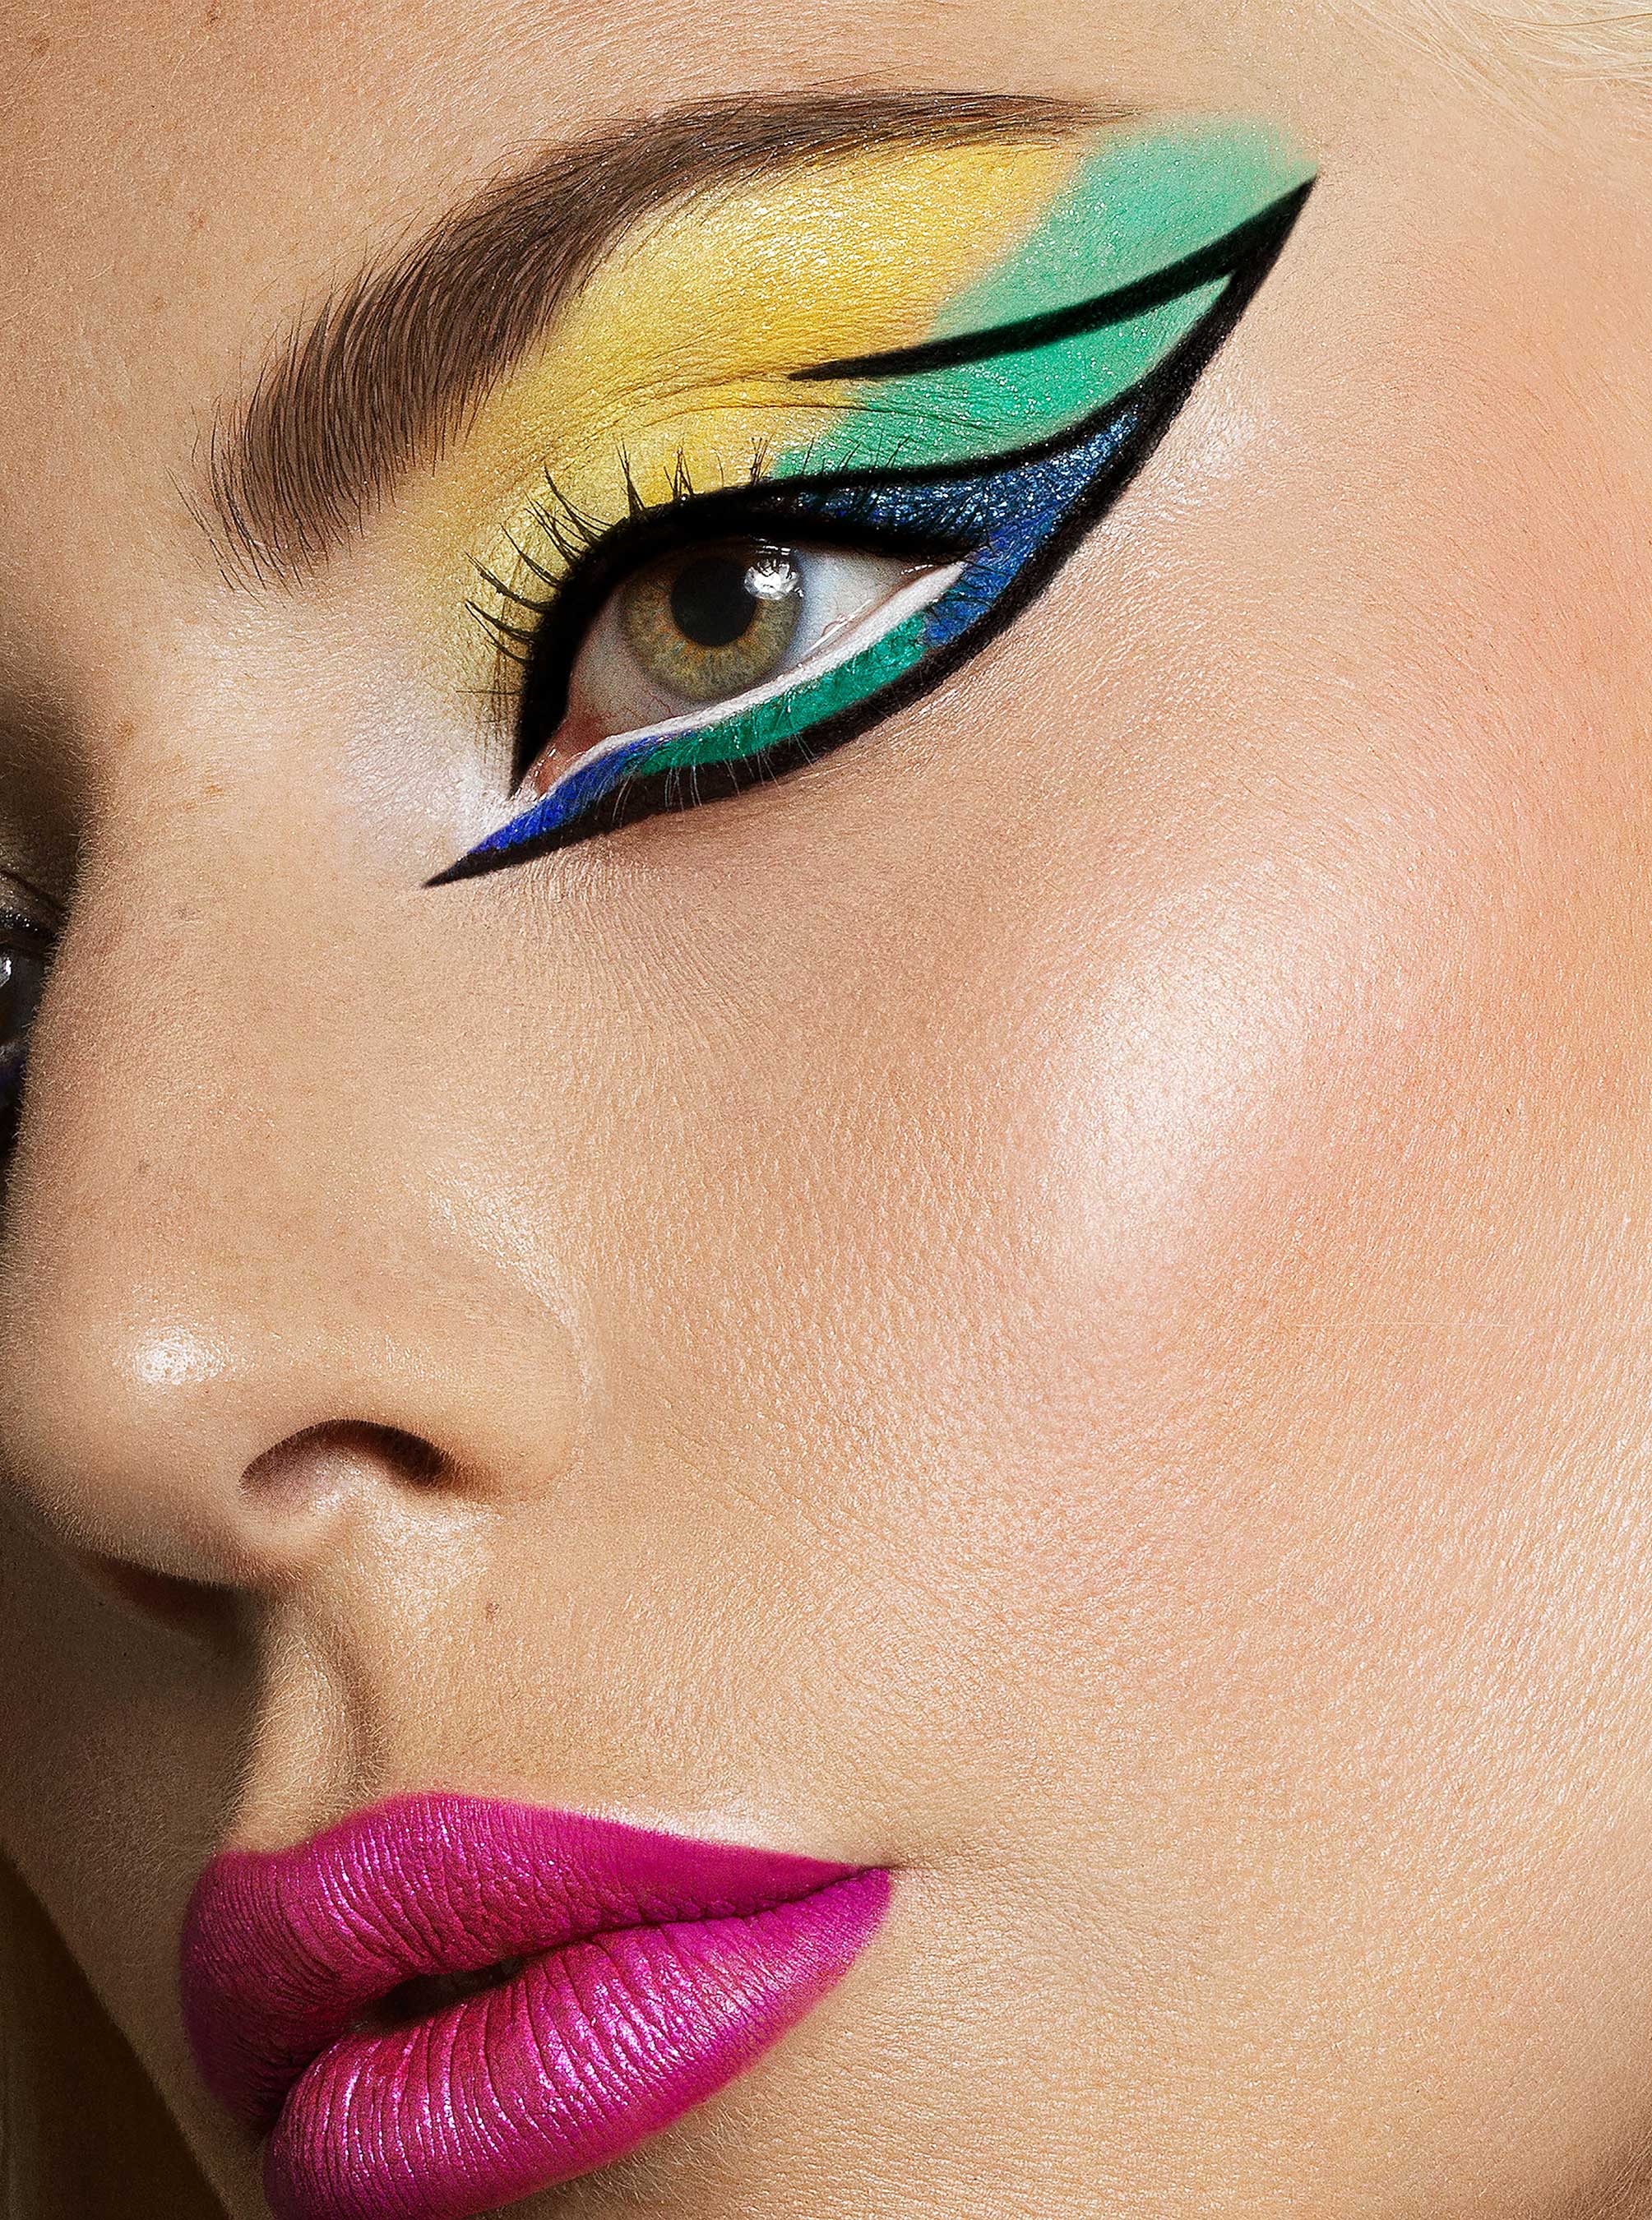 HAUS LABS BY LADY GAGA Founder Lady Gaga showcasing a supercharged clean artistry look wearing Hy-Power Pigments Paints, The Edge Precision Brow Pencil, Optic Intensity Eco Gel Eyeliner Pencils, and Bio-Radiant Gel-Powder Highlighter. Shot By: Domen & Van De Velde